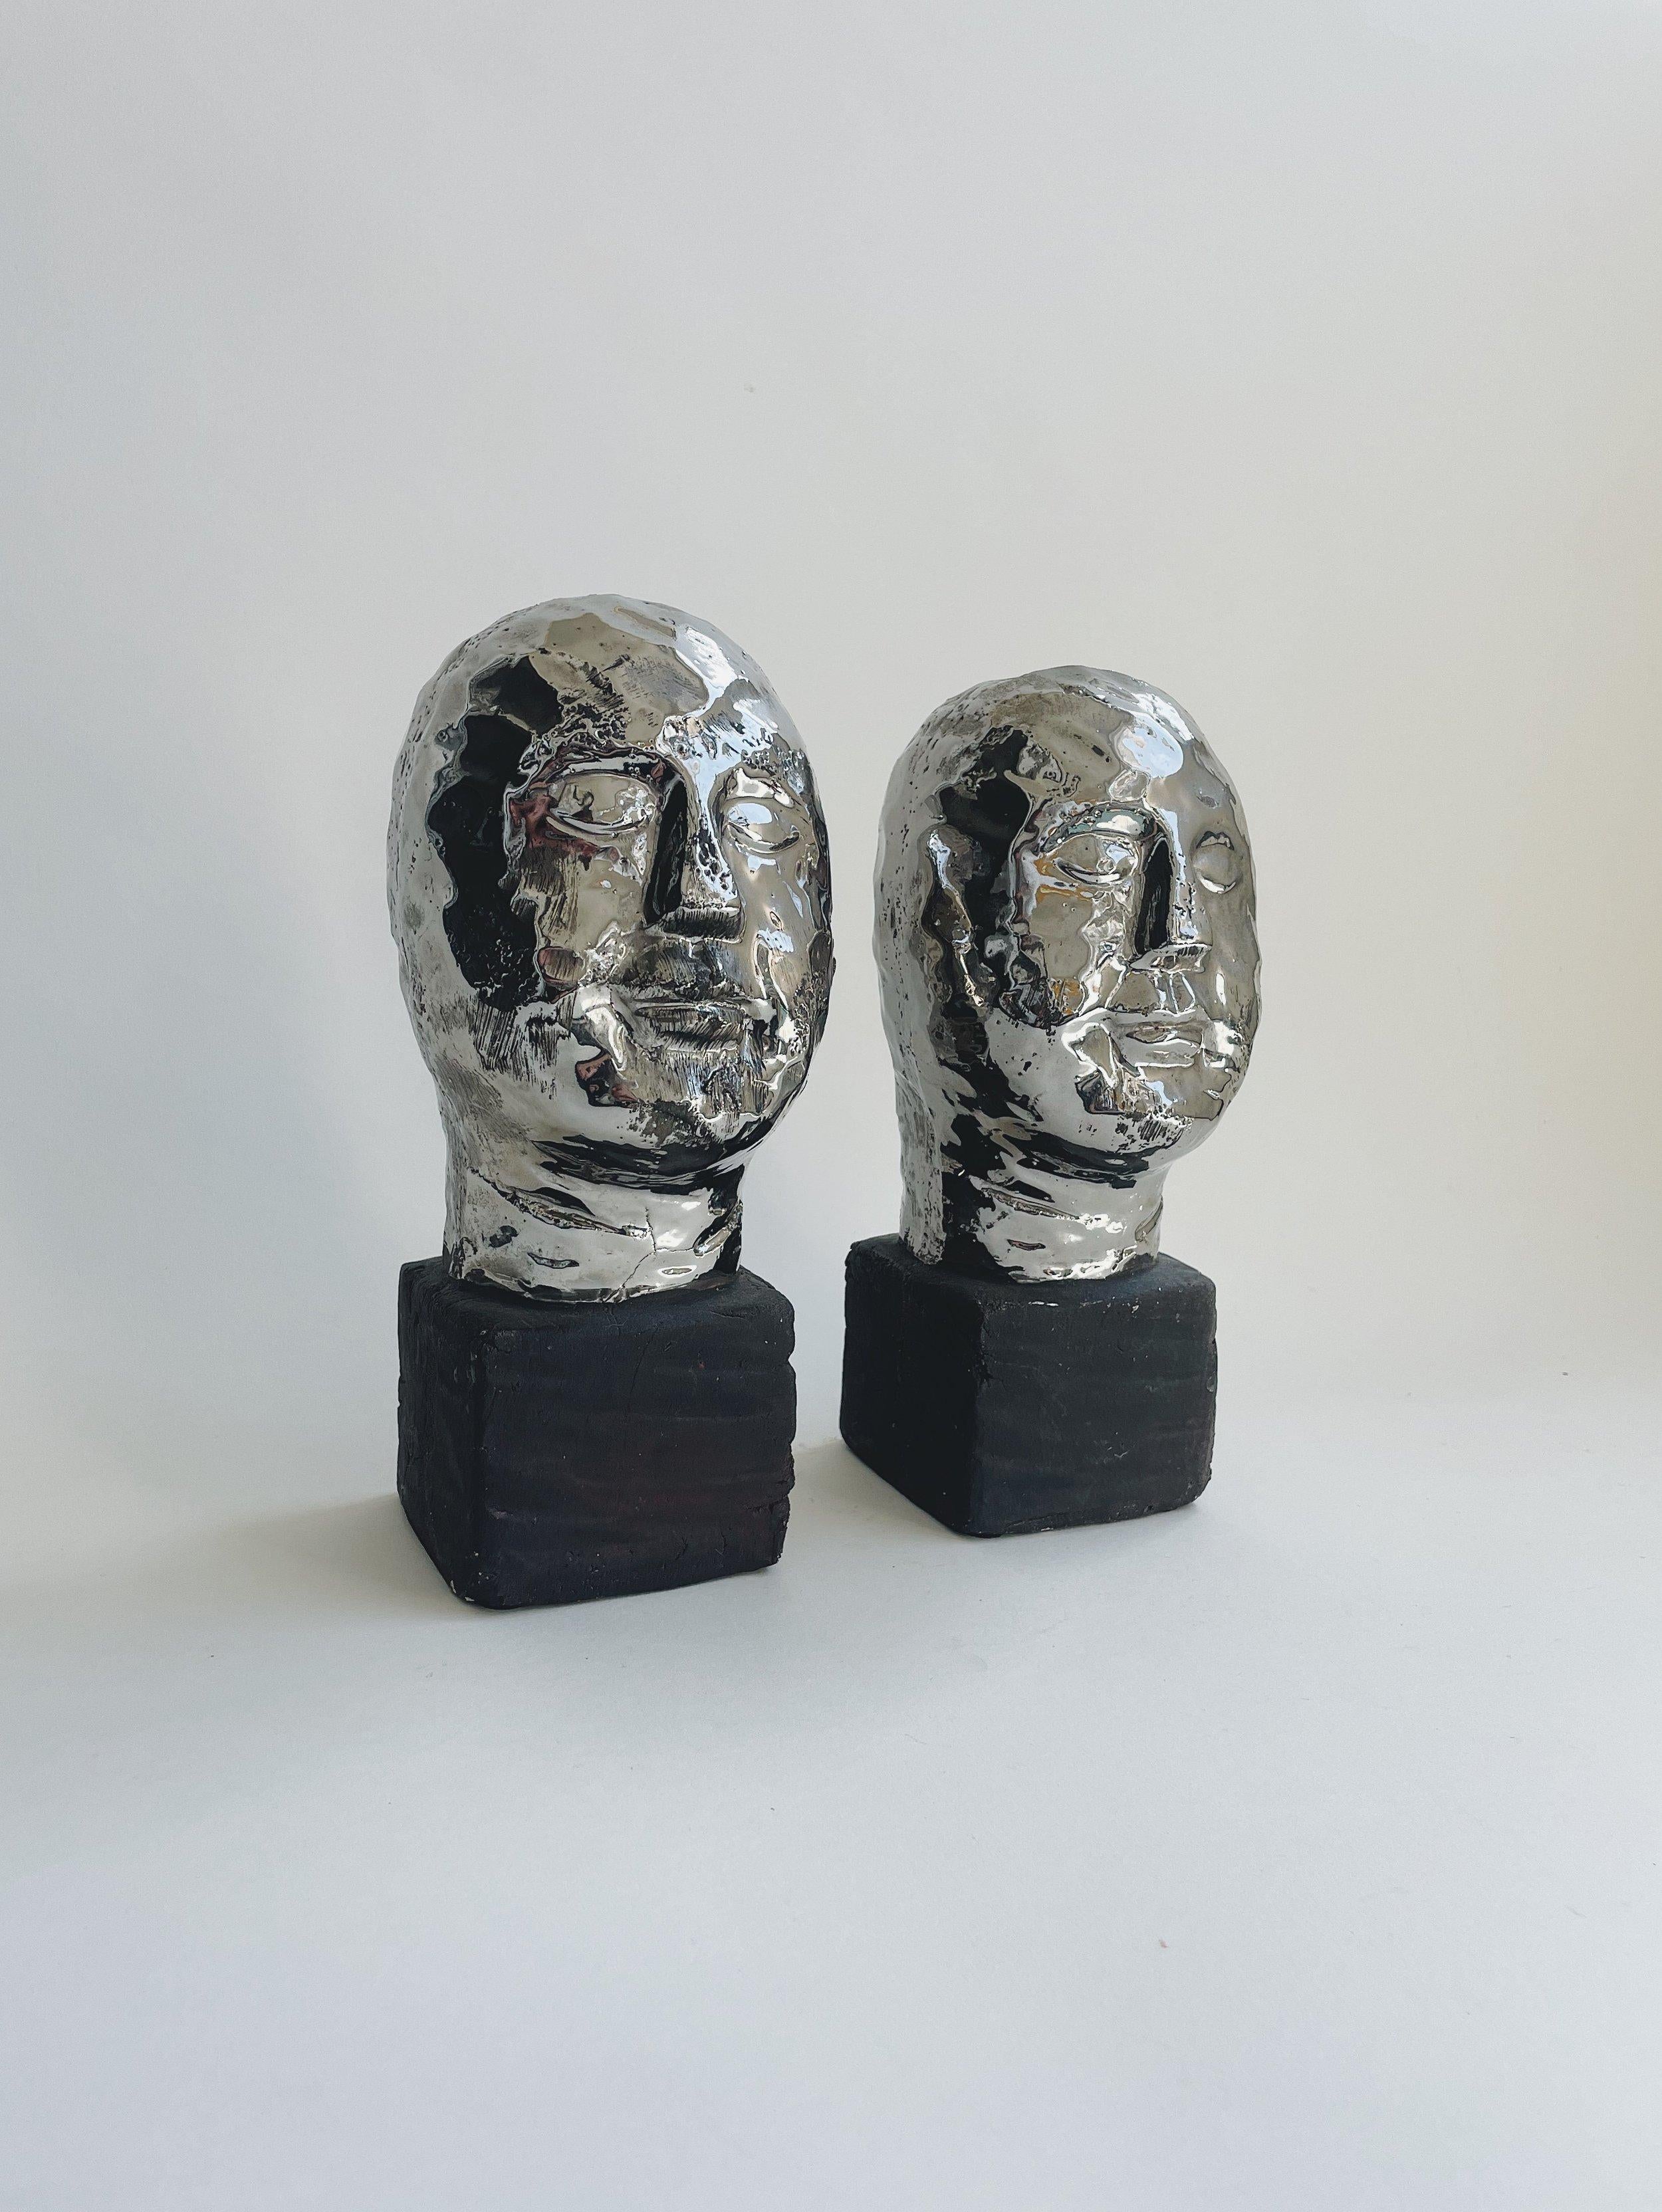 Studio pottery

Remarkable pair of studio pottery busts. Simple, almost Cycladic style faces sit atop a matte brown glazed cube. Sculpted as a single piece of pottery. Faces are glazed in a reflective silver. Sold as a pair.

Each pieces has a